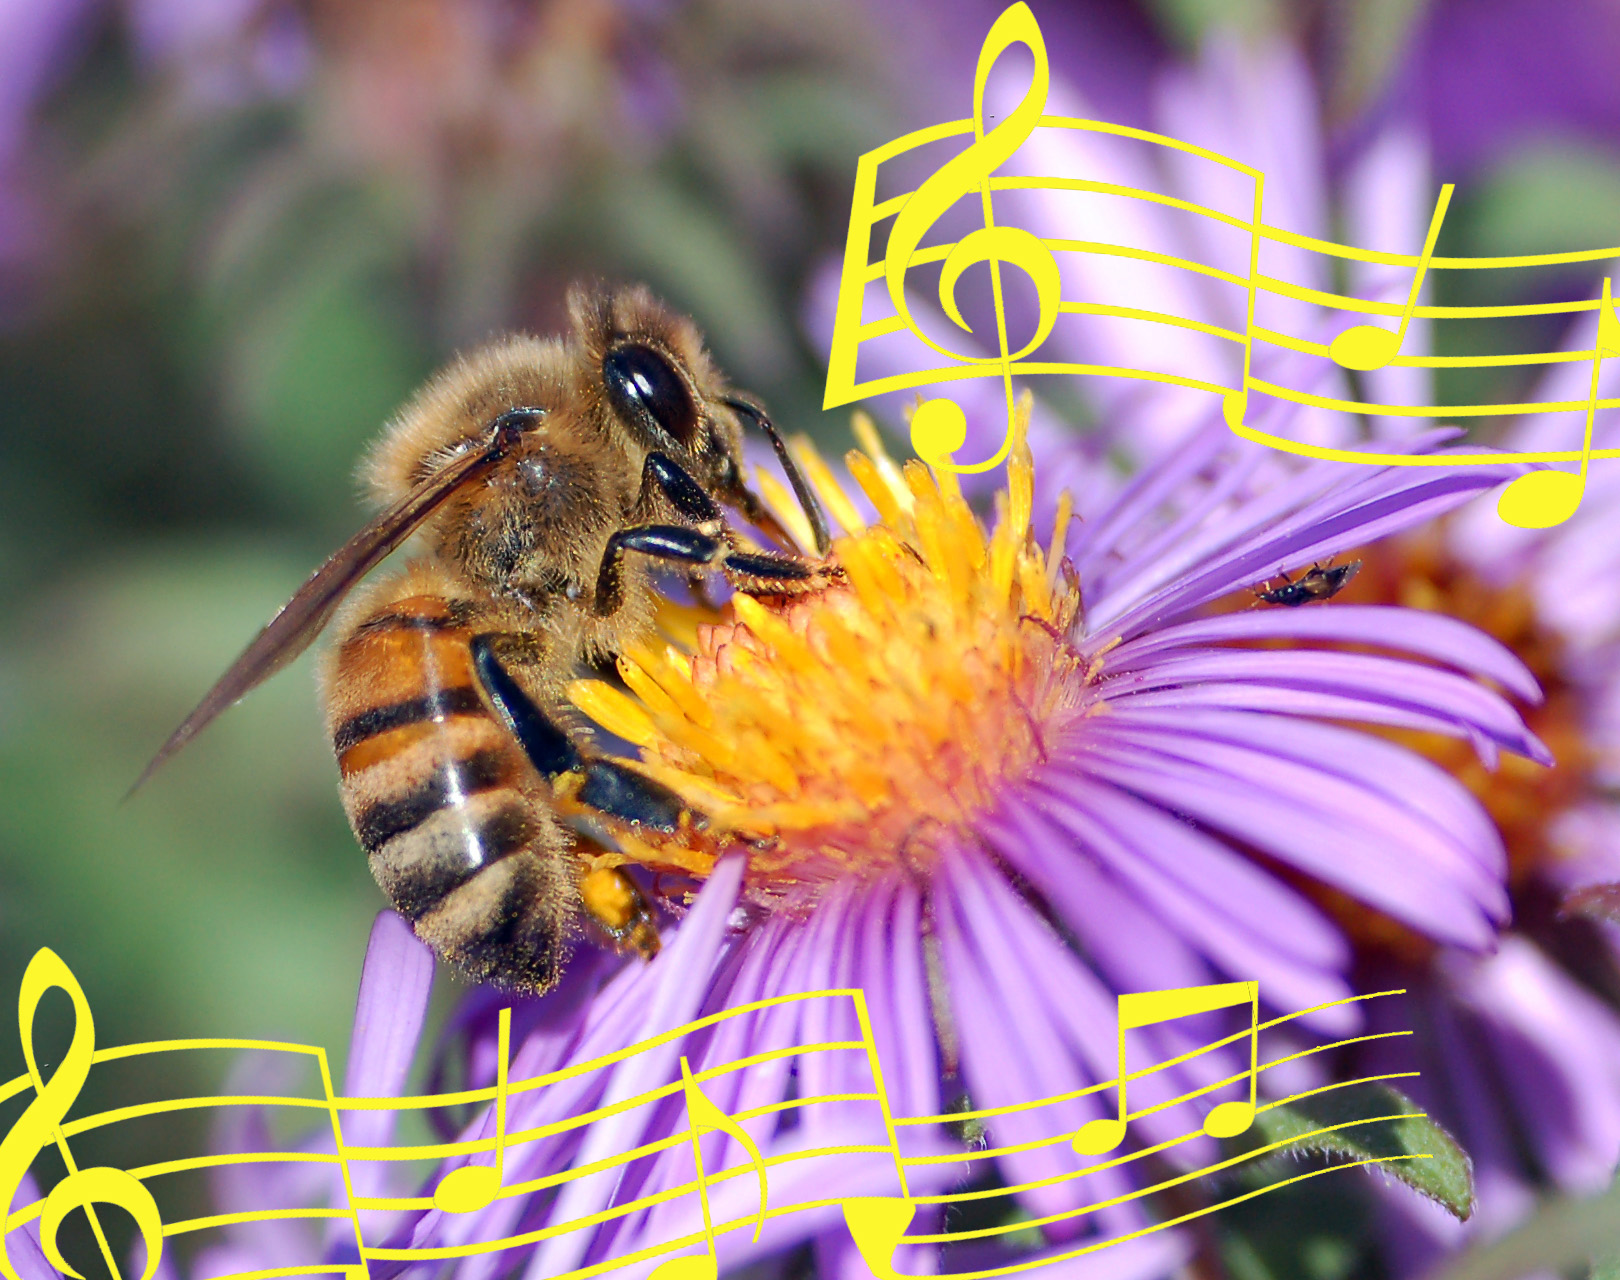 Honey bees communicate by dancing.